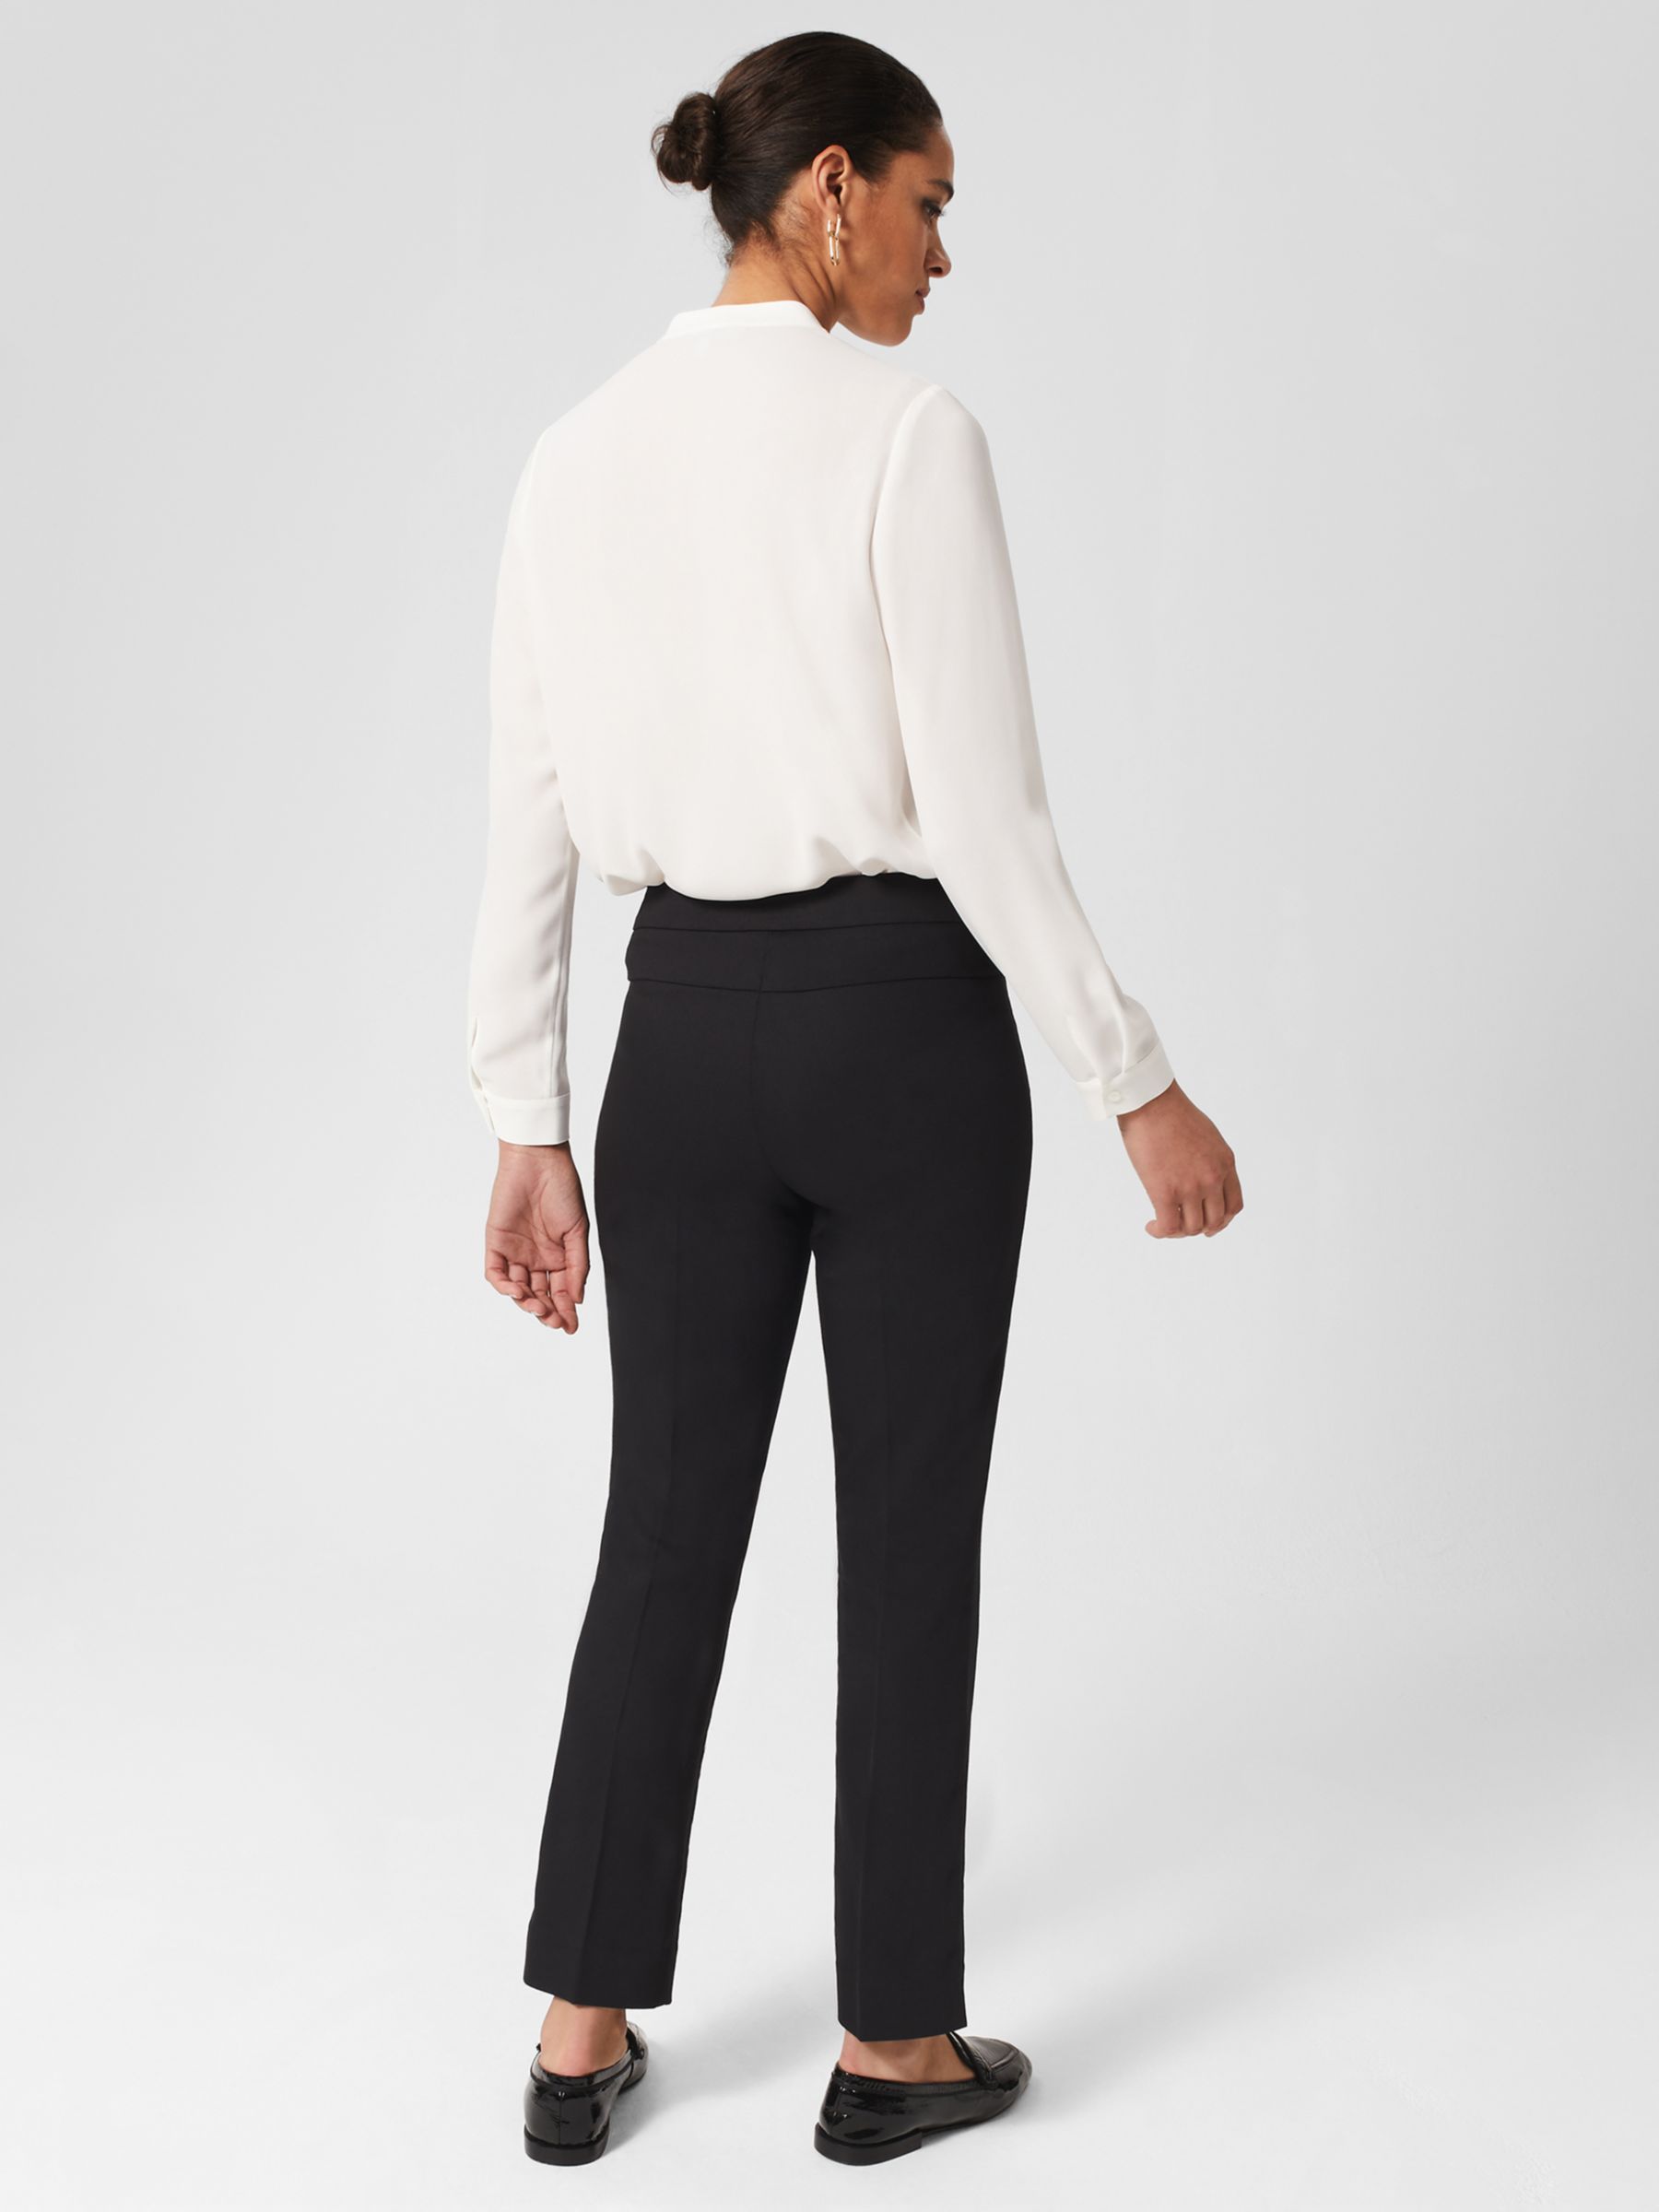 Buy Hobbs Annie Cotton Blend Trousers Online at johnlewis.com